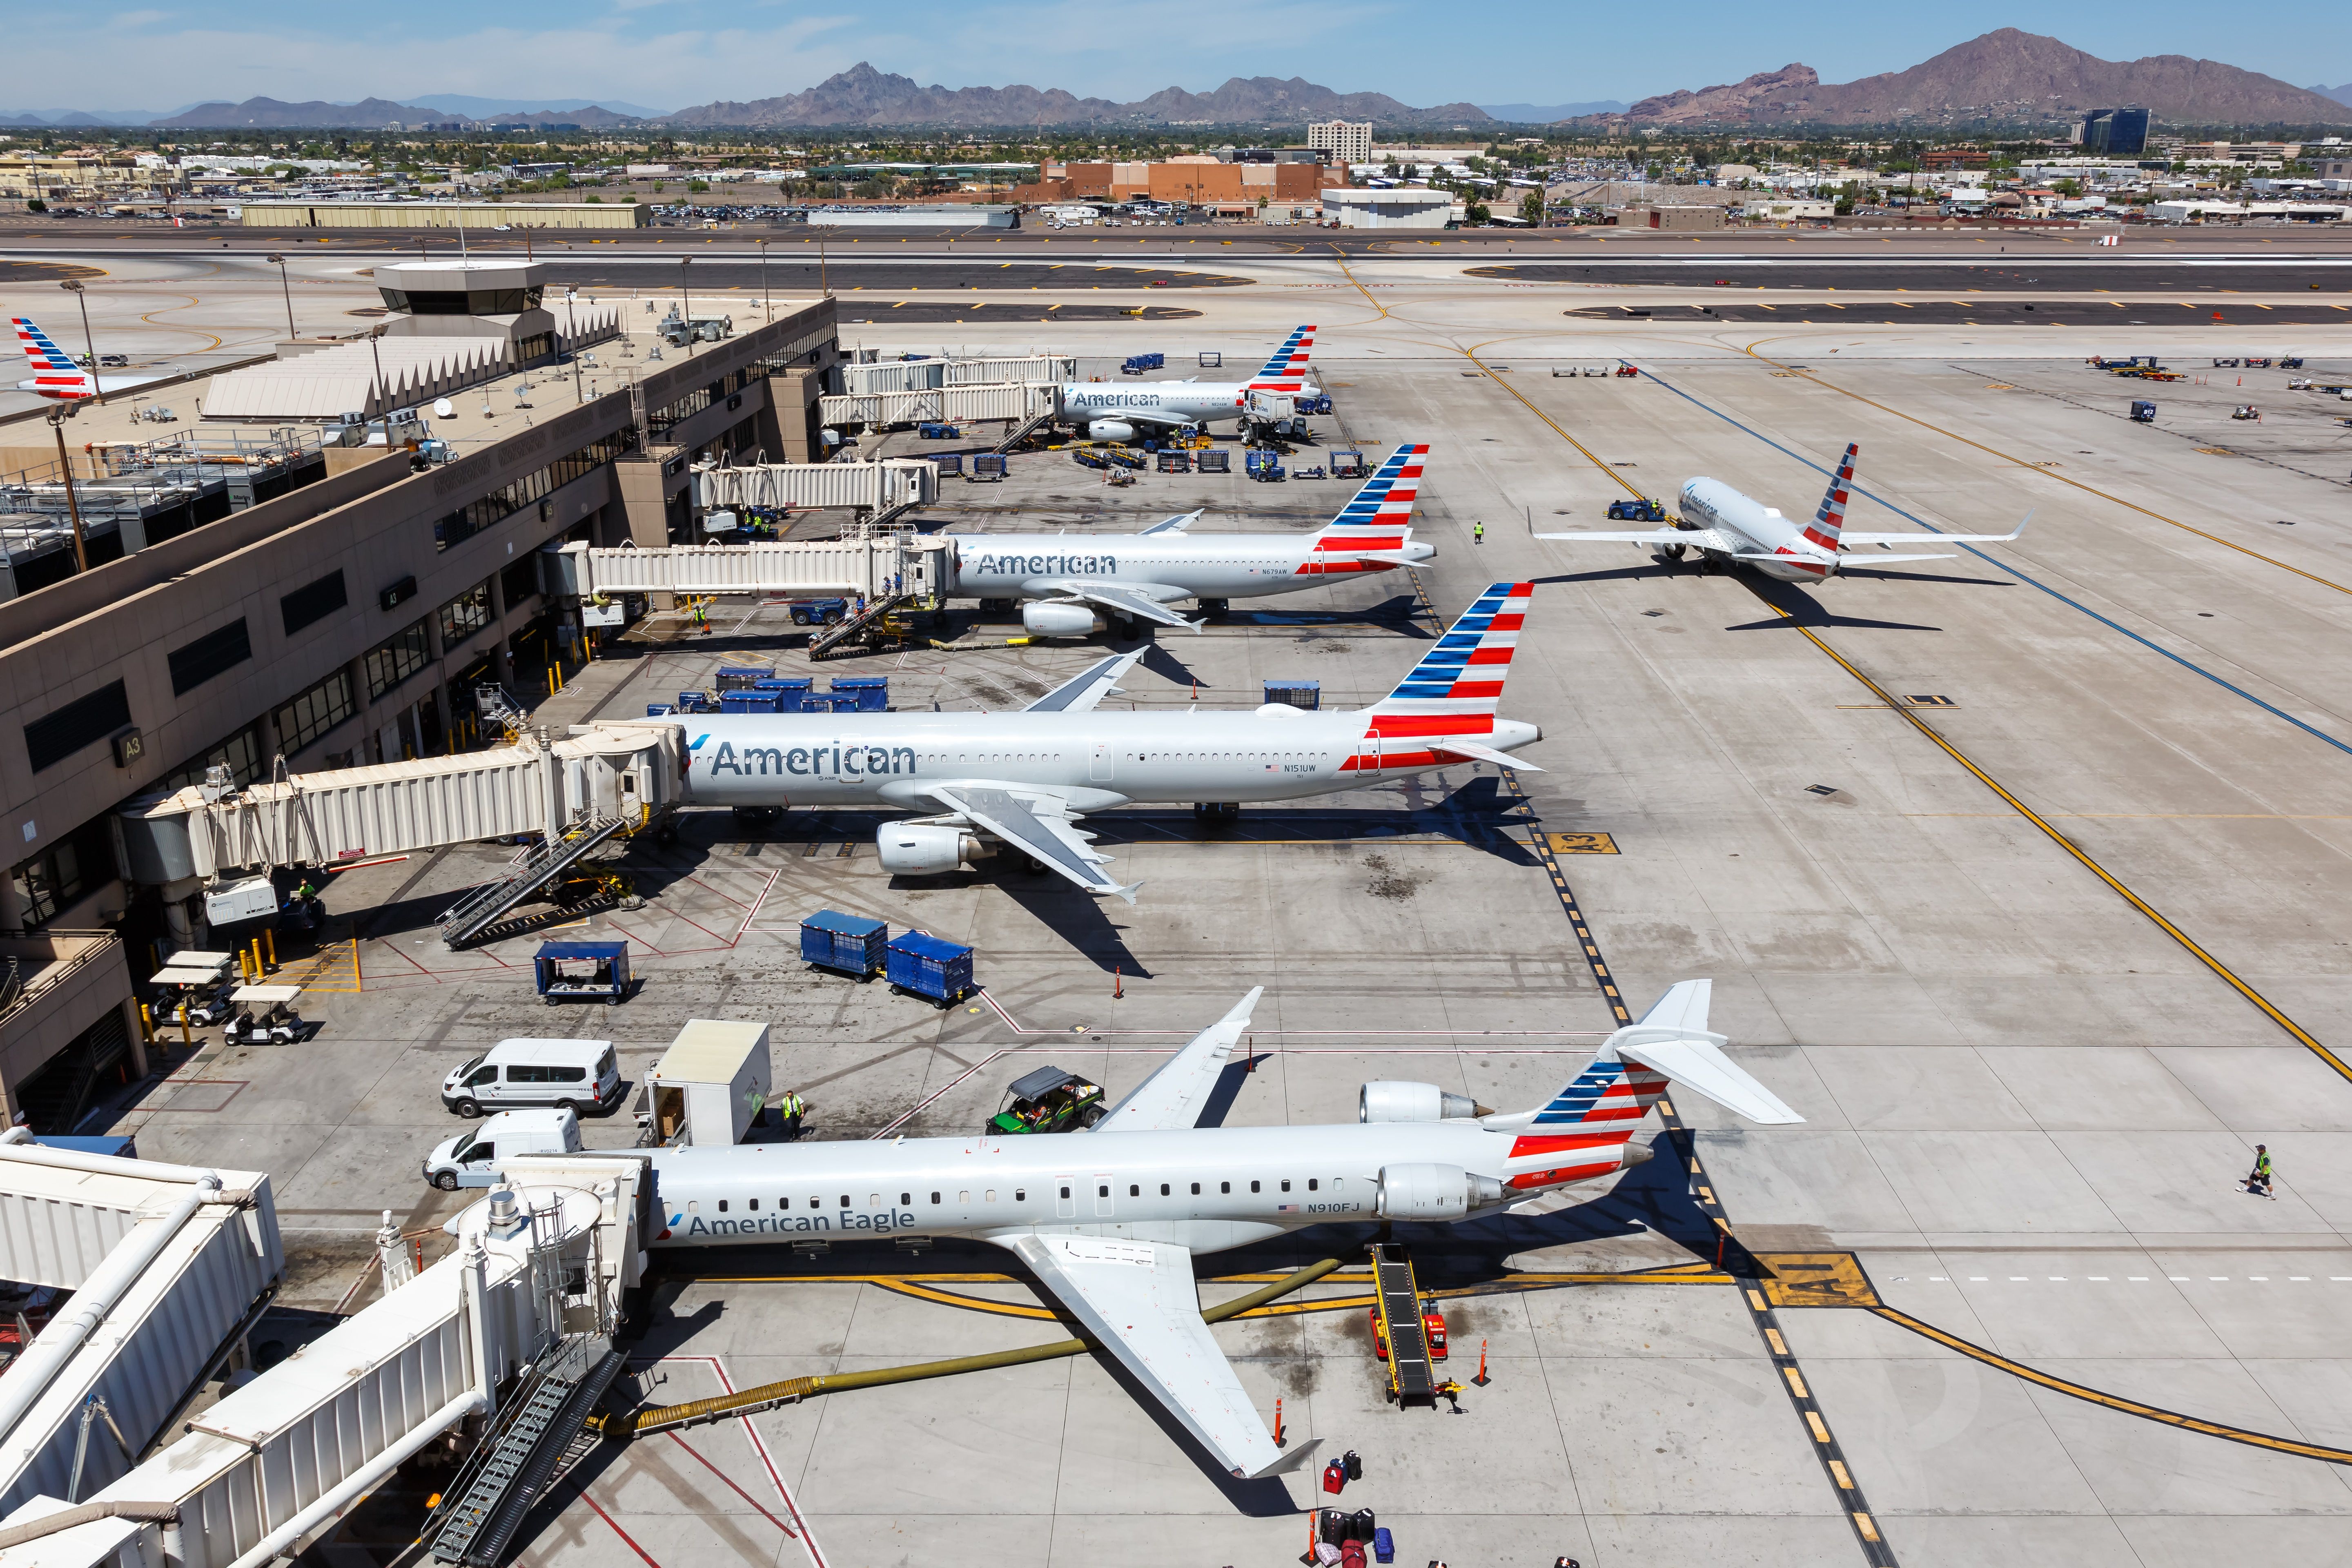 American Airlines at Phoenix-1